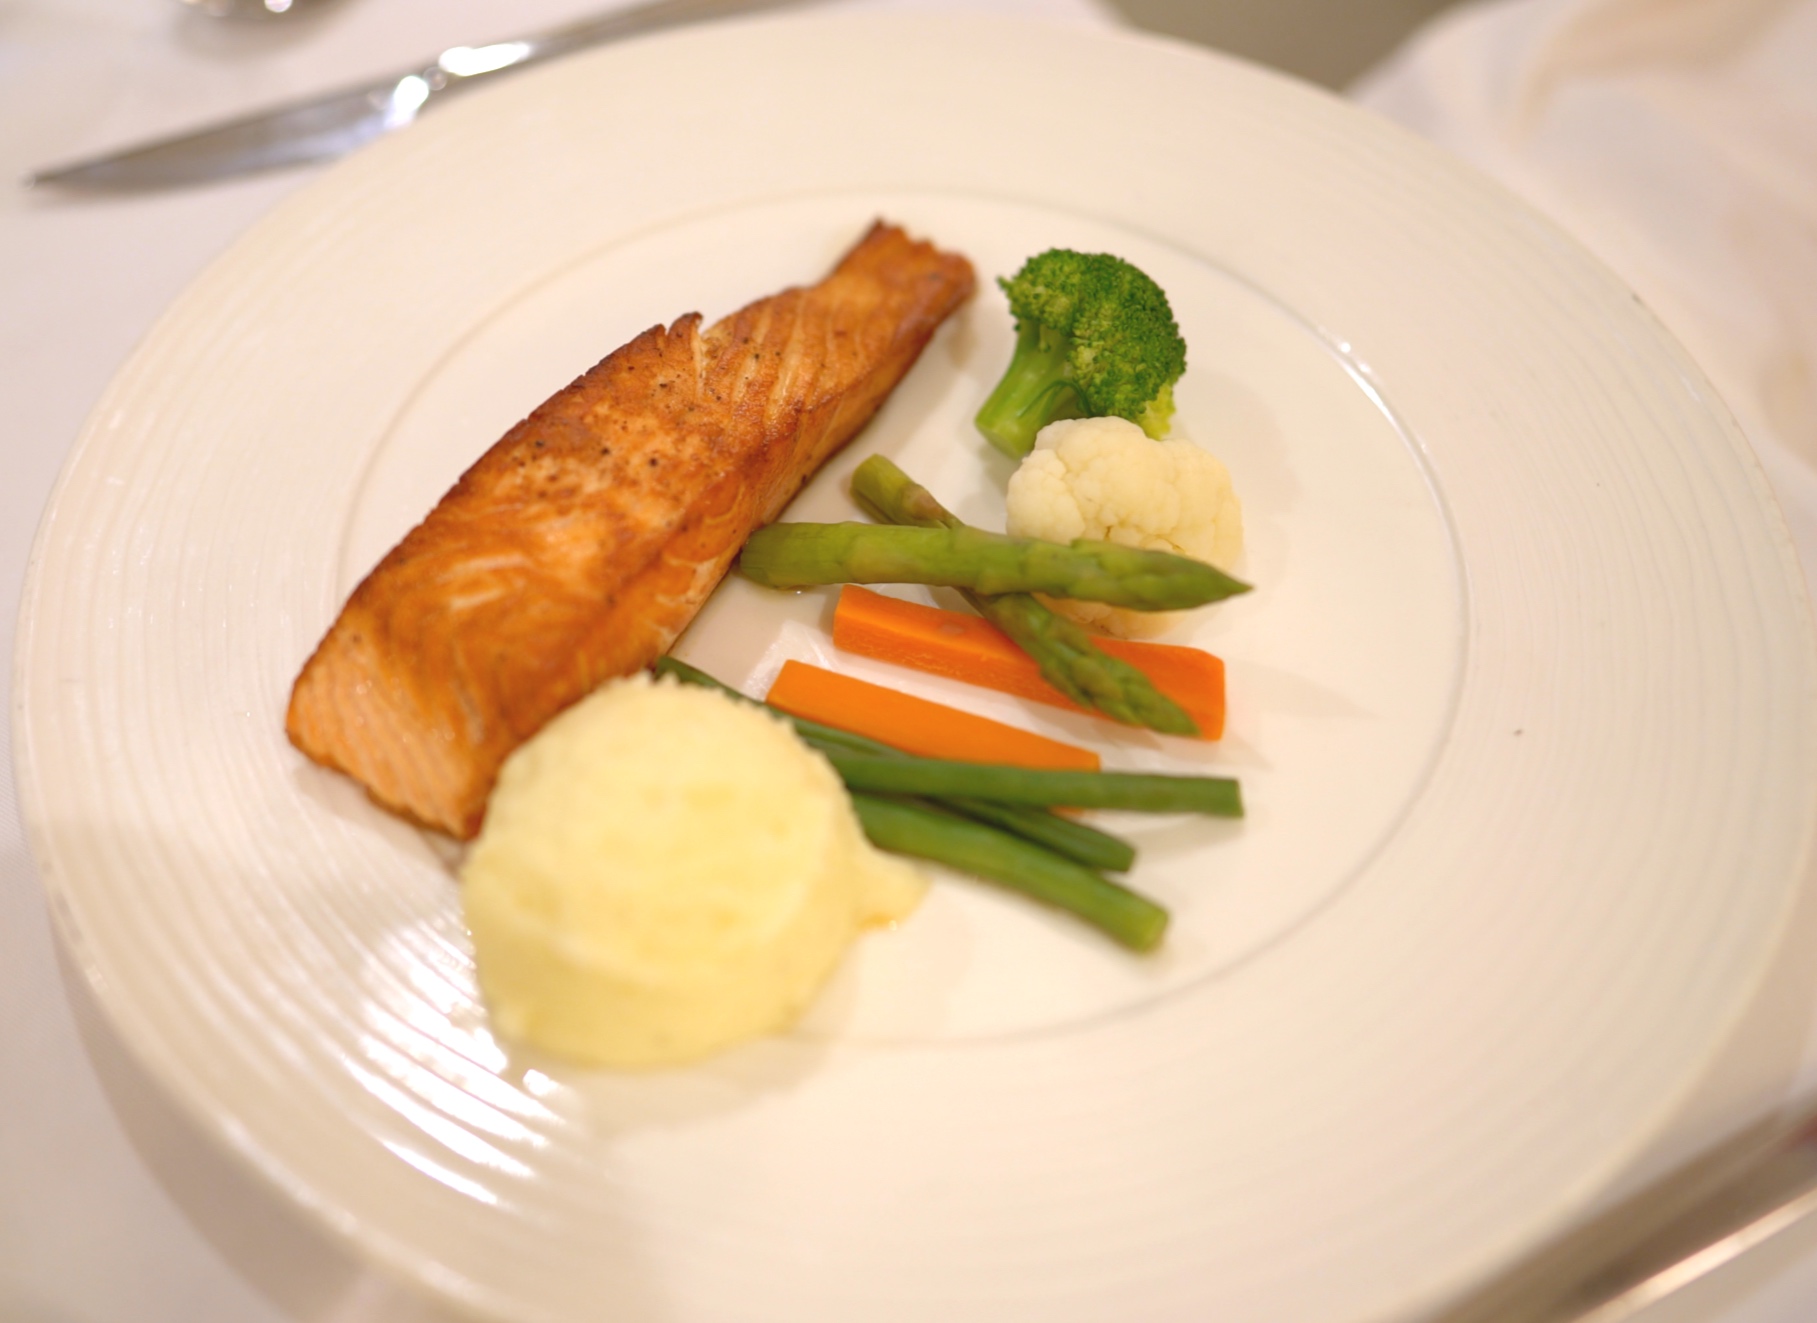  In-suite grilled salmon and vegetables.  